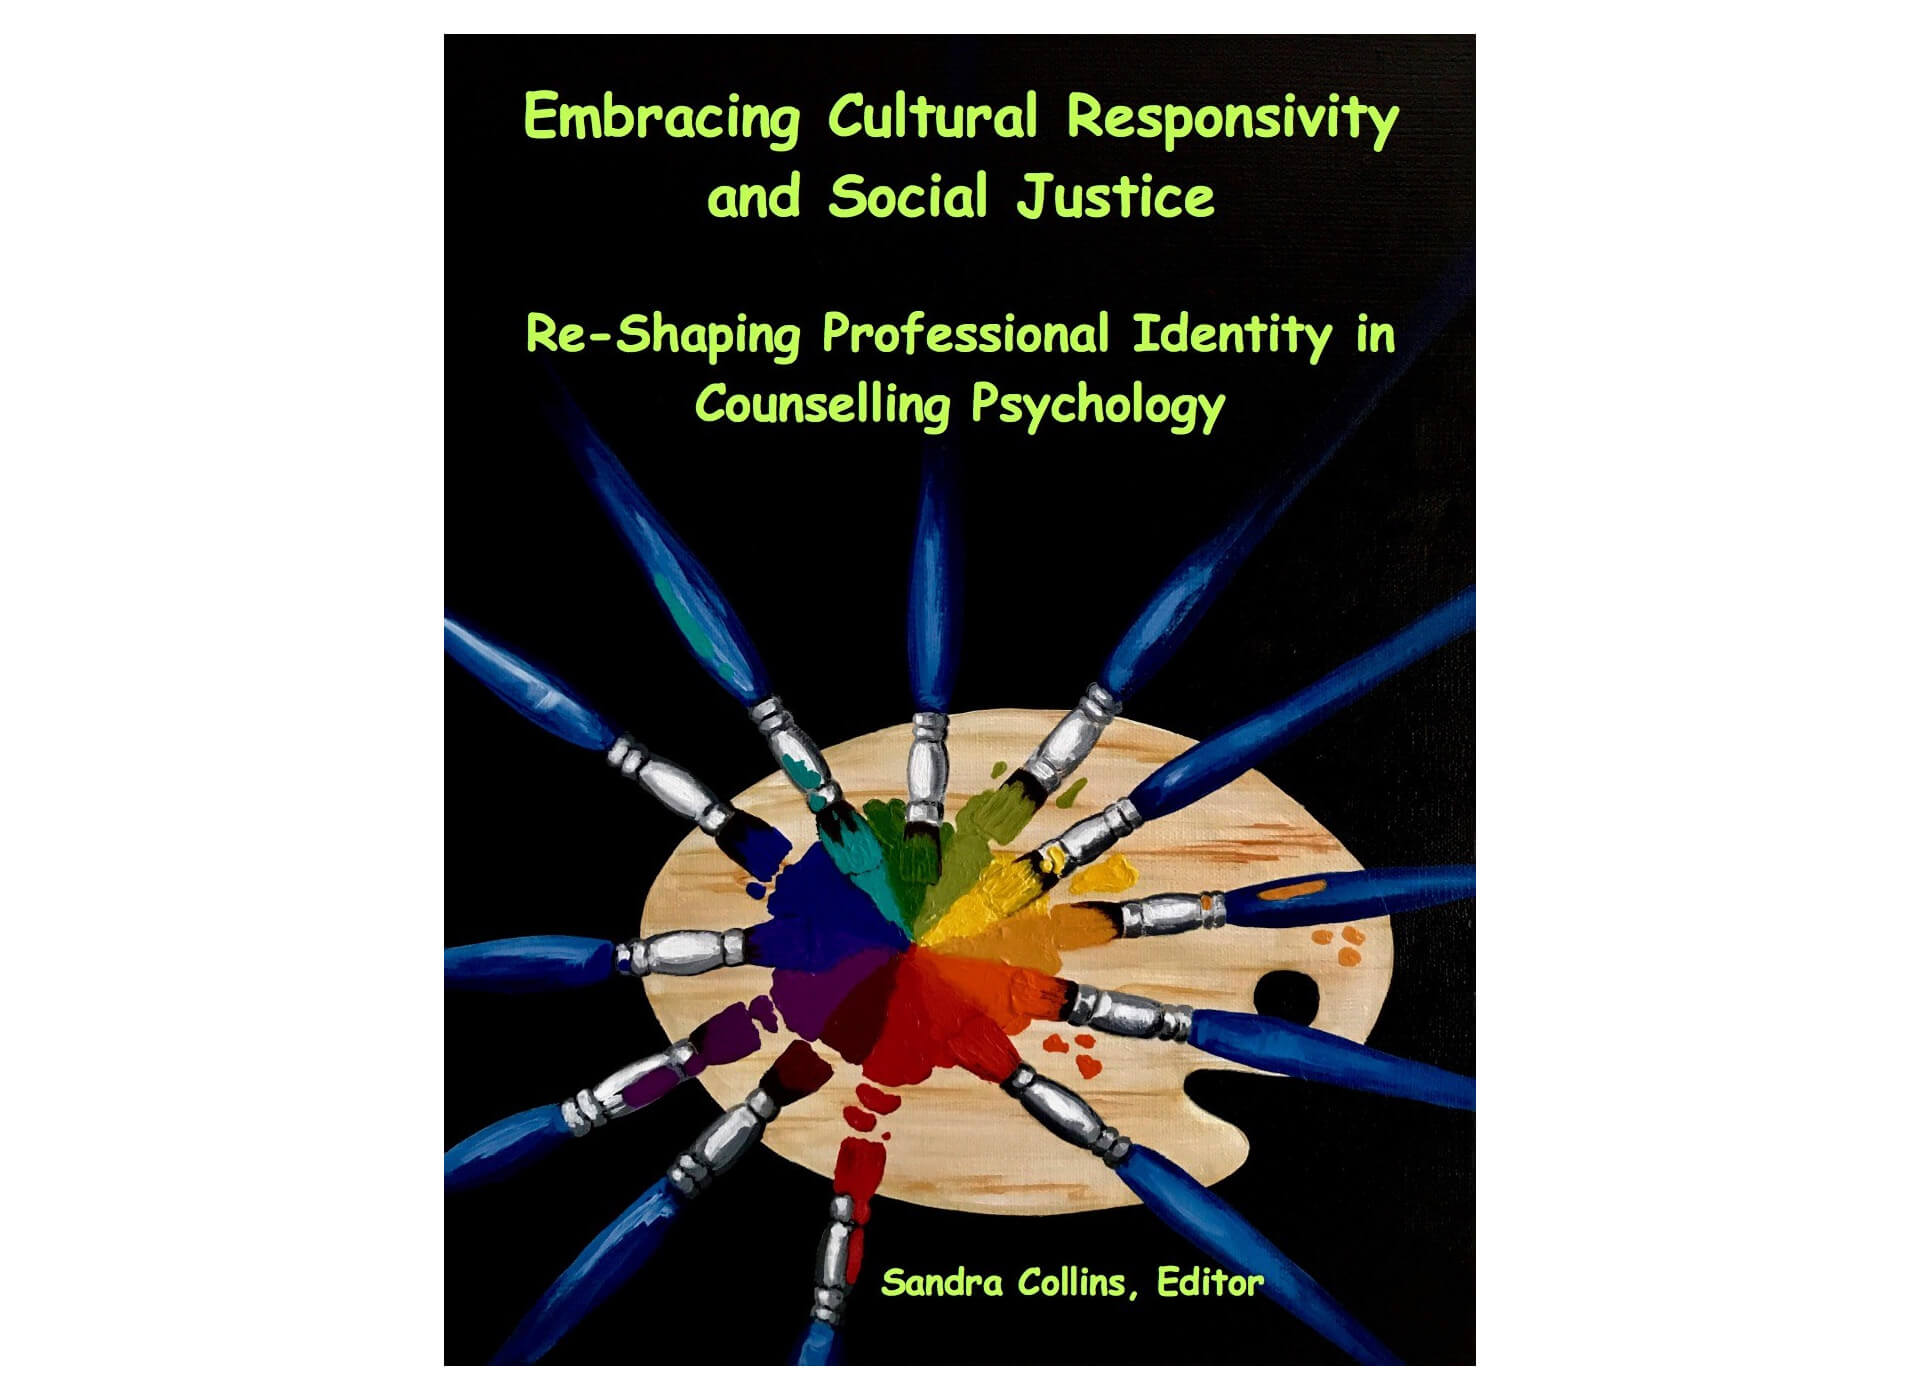 Dr. Sandra Collins, a professor in AU's Master of Counselling program, has written a book to help people deepend their knowledge about and navigate this evolving cultural landscape.